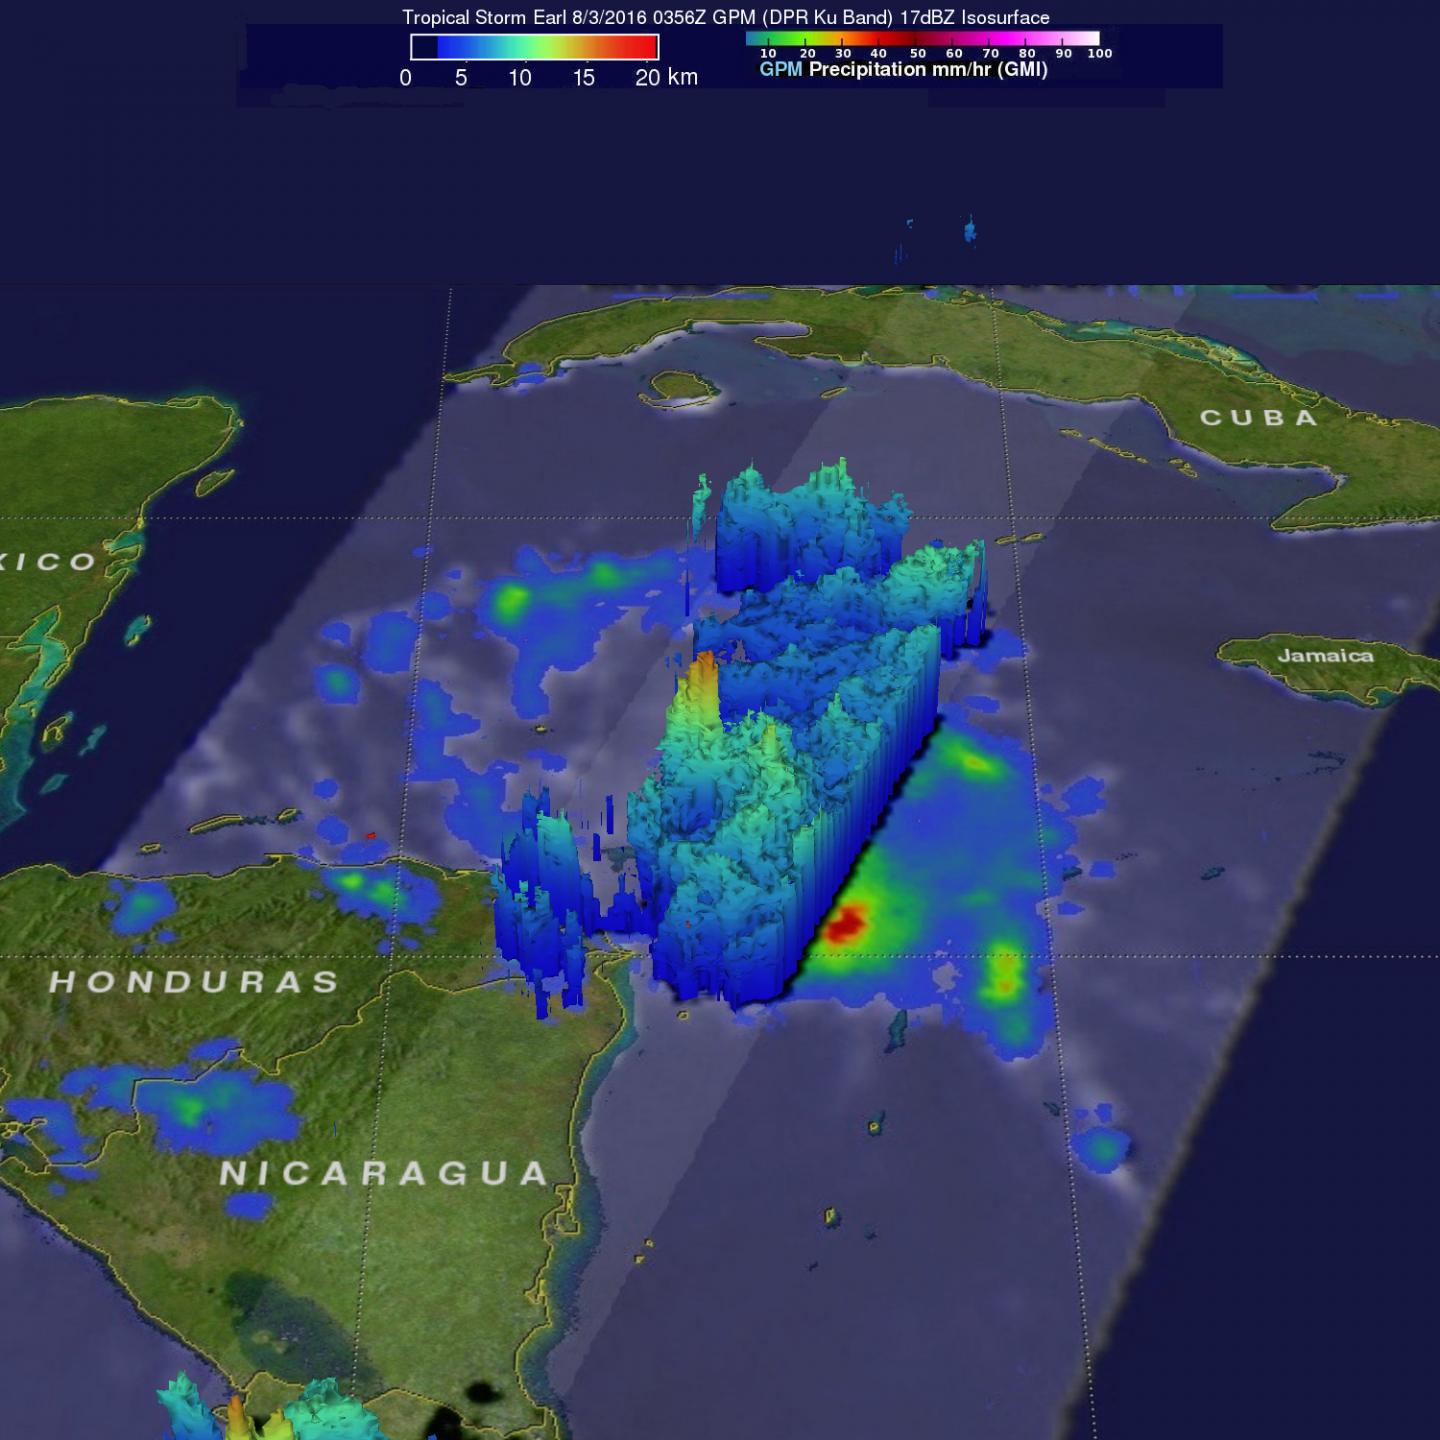 NASA's GPM Sees Towering Thunderstorms in Intensifying Tropical Storm Earl